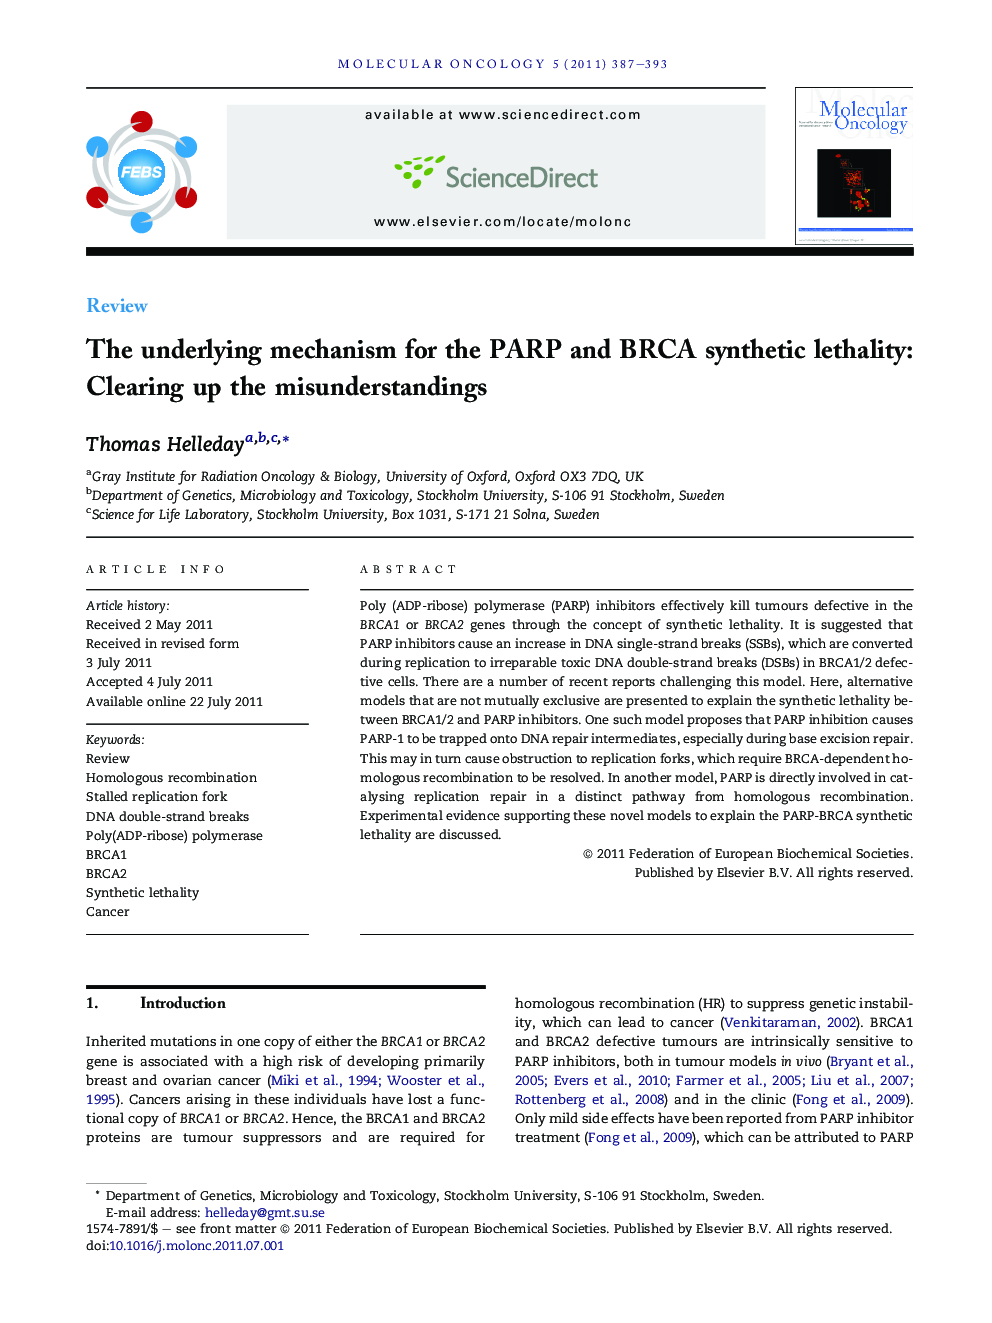 The underlying mechanism for the PARP and BRCA synthetic lethality: Clearing up the misunderstandings